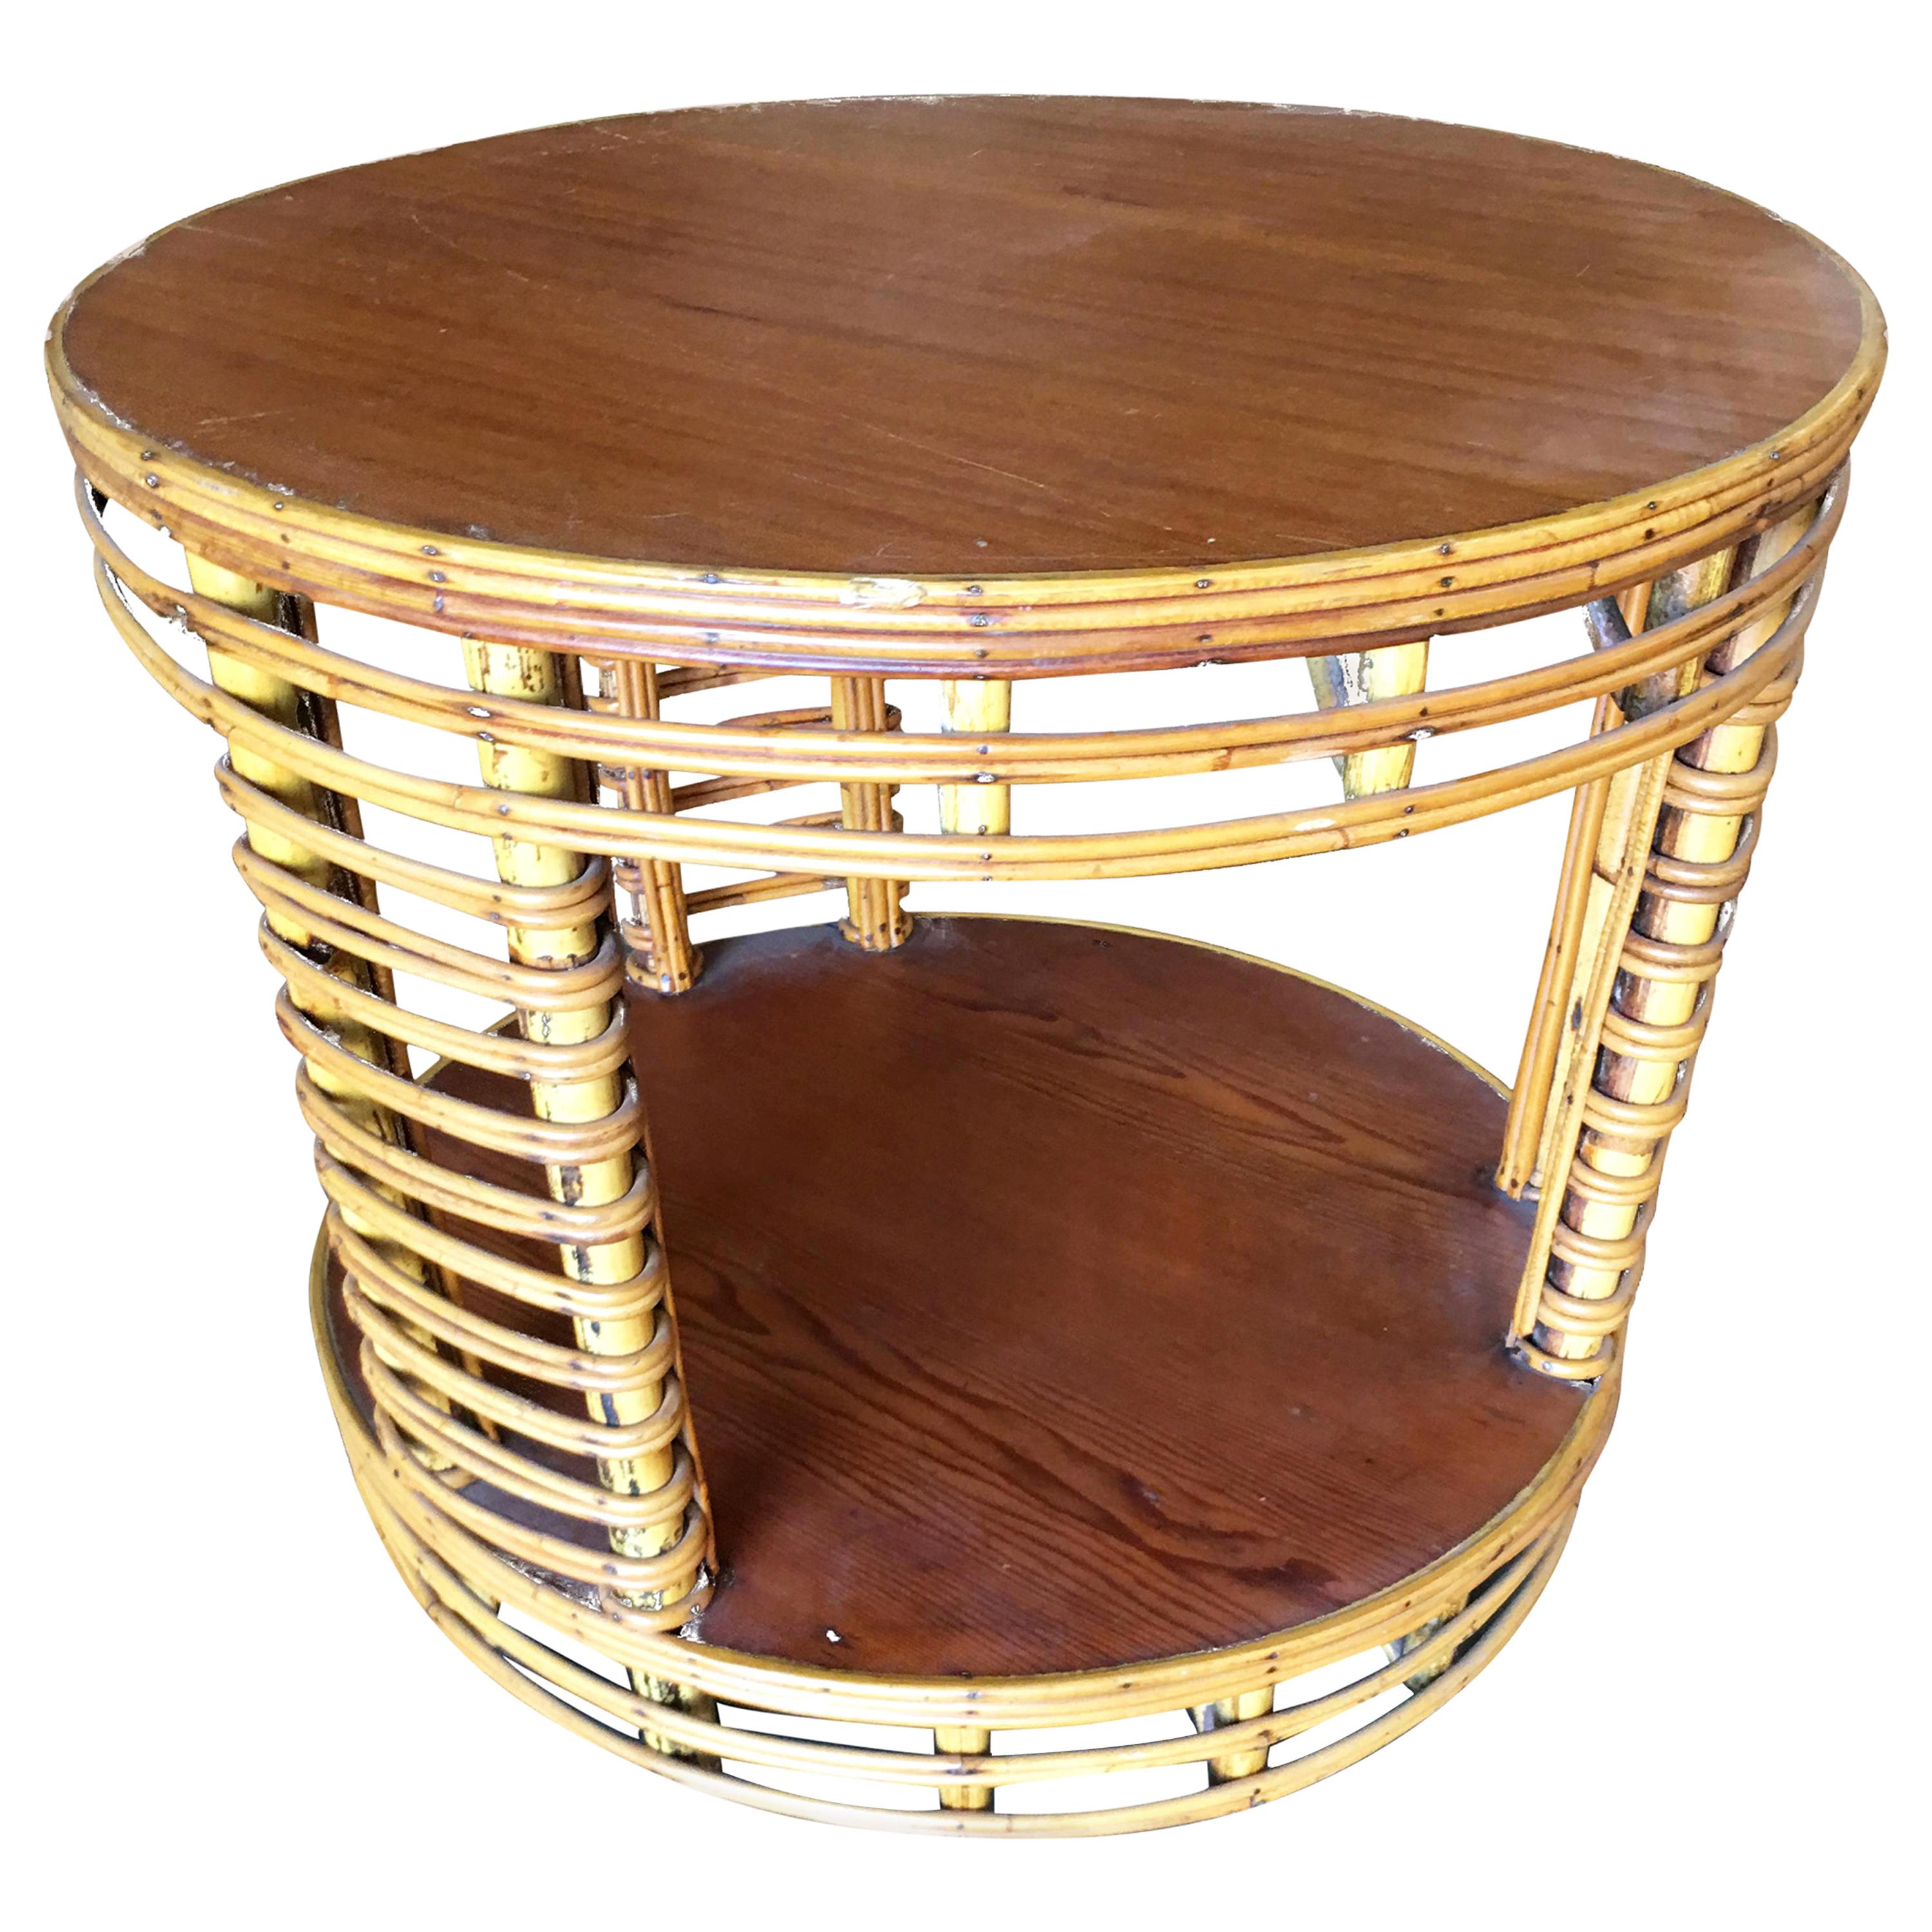 Two-Tier Round Stick Rattan Coffee Table with Mahogany Top